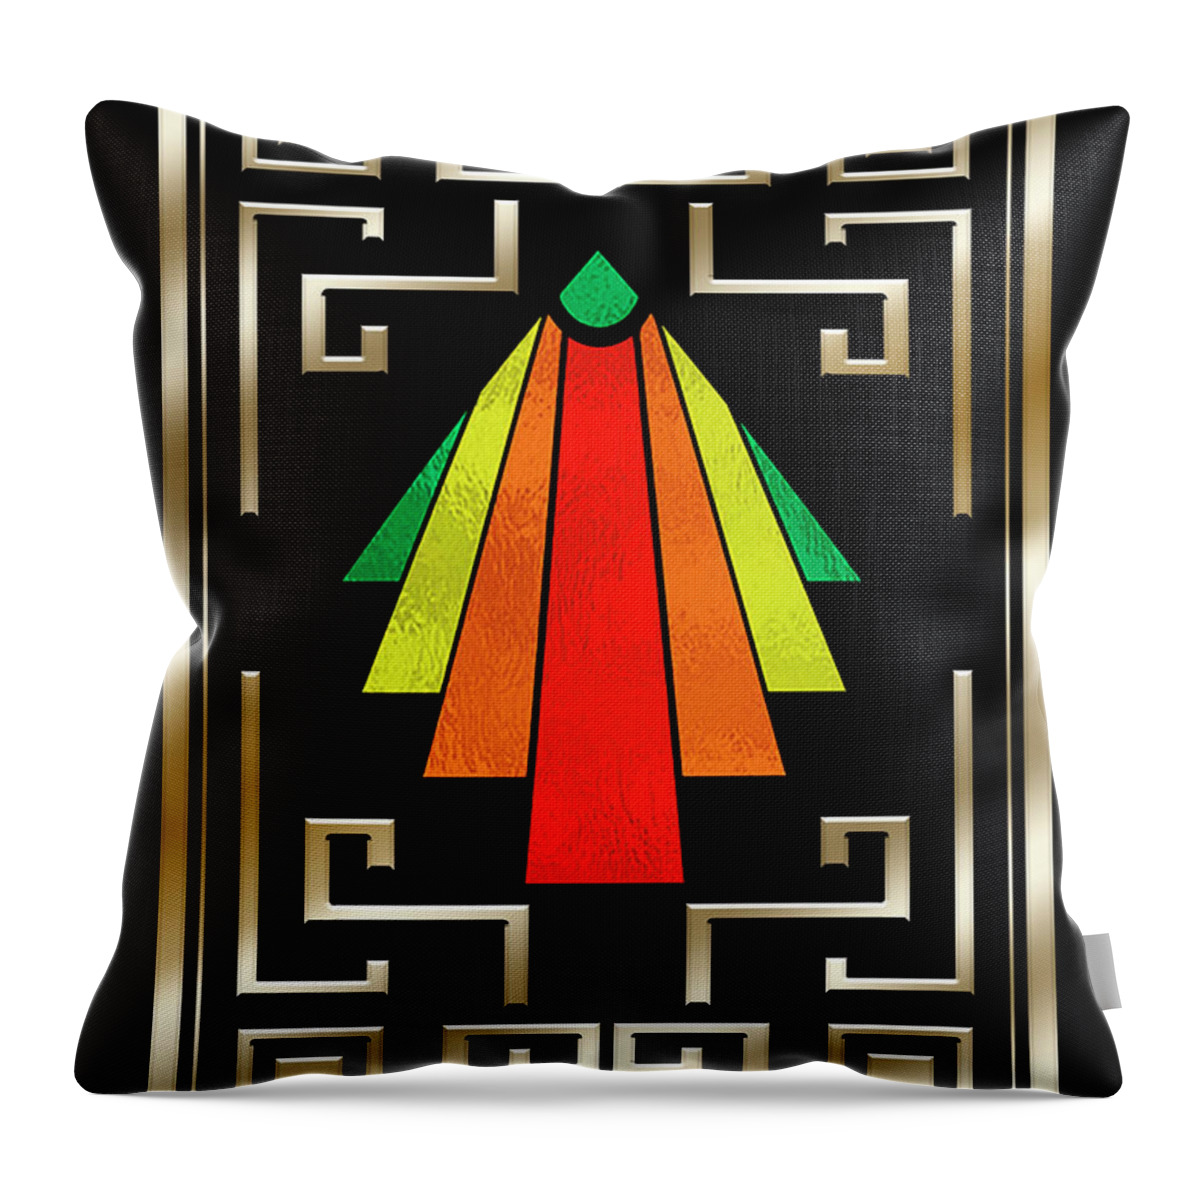 Staley Throw Pillow featuring the digital art Christmas Card by Chuck Staley